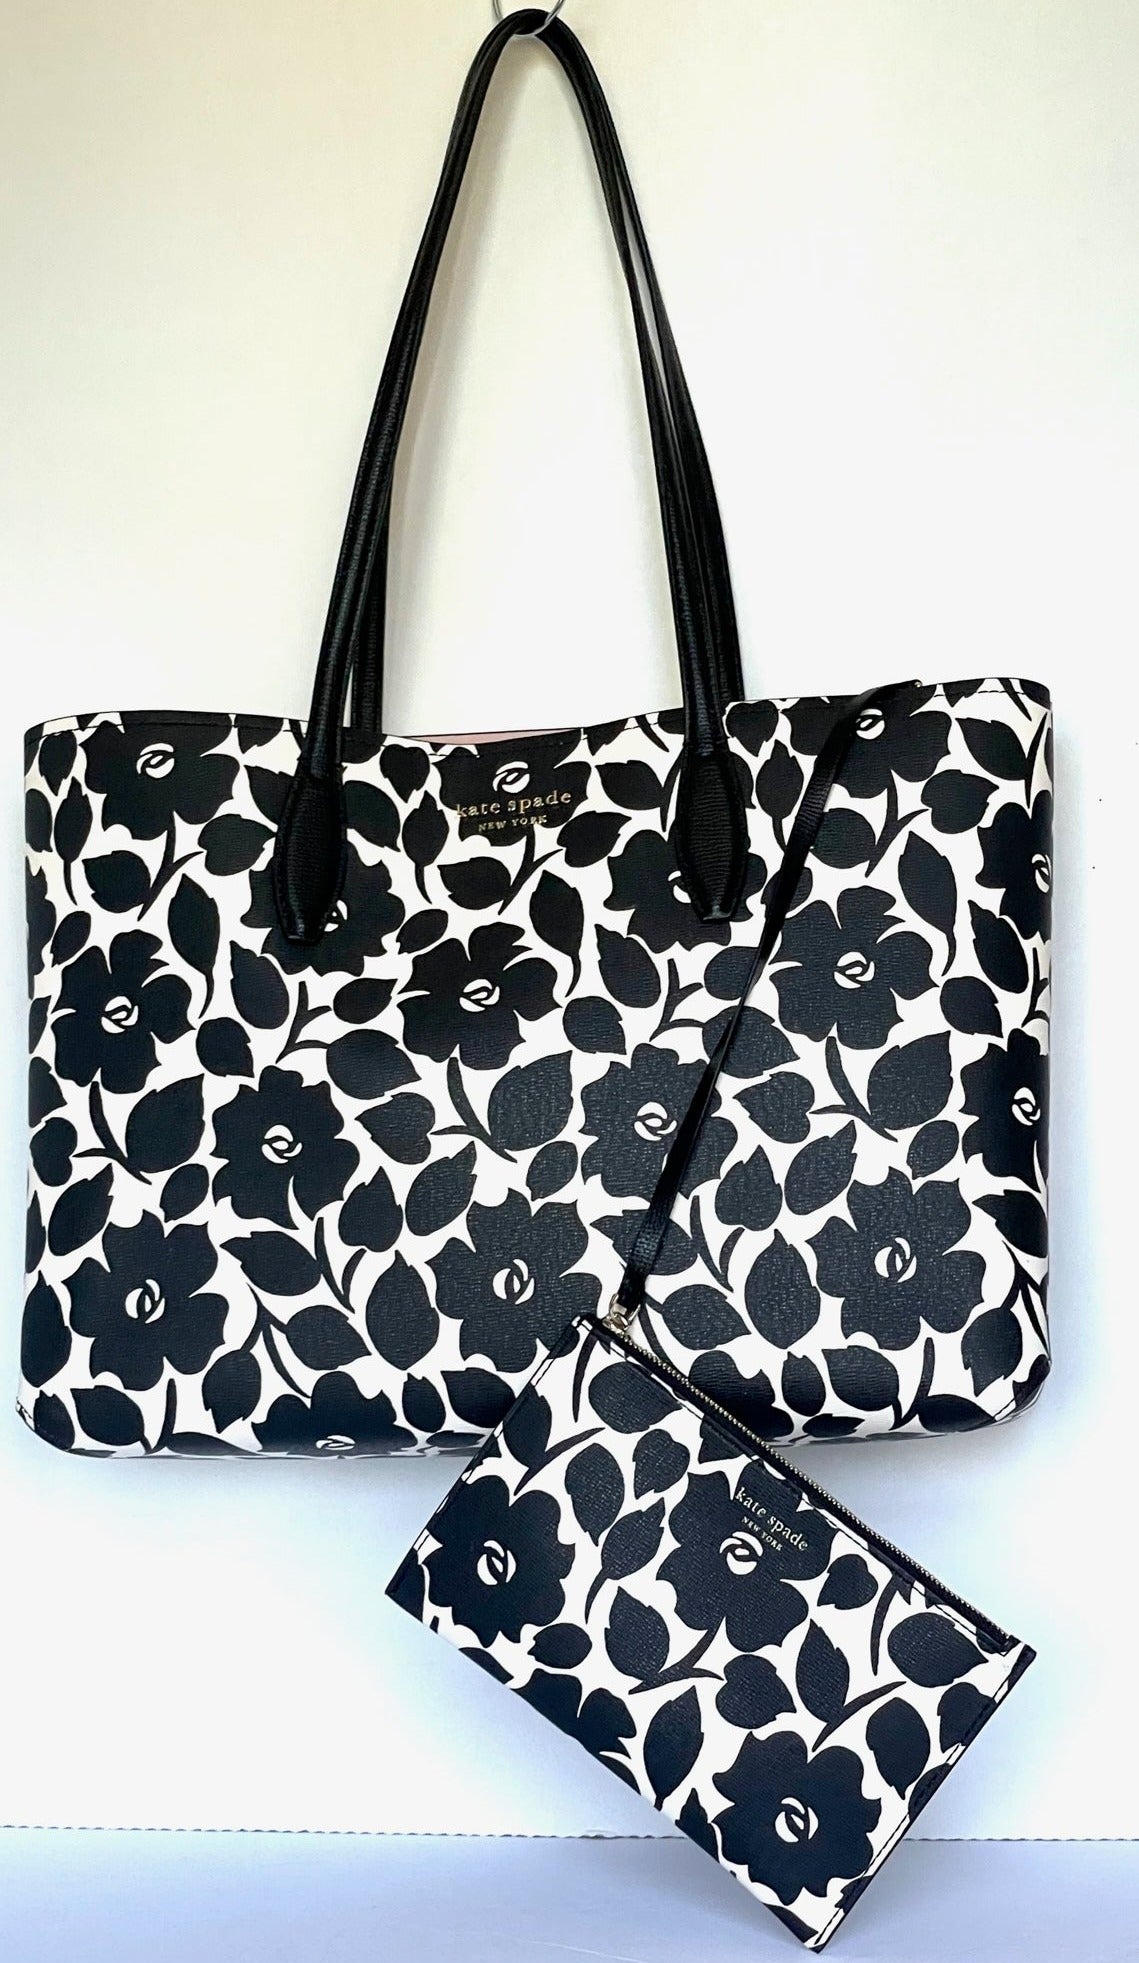 kate spade new york All Day Flower Bed Large Tote with Removable Pouch